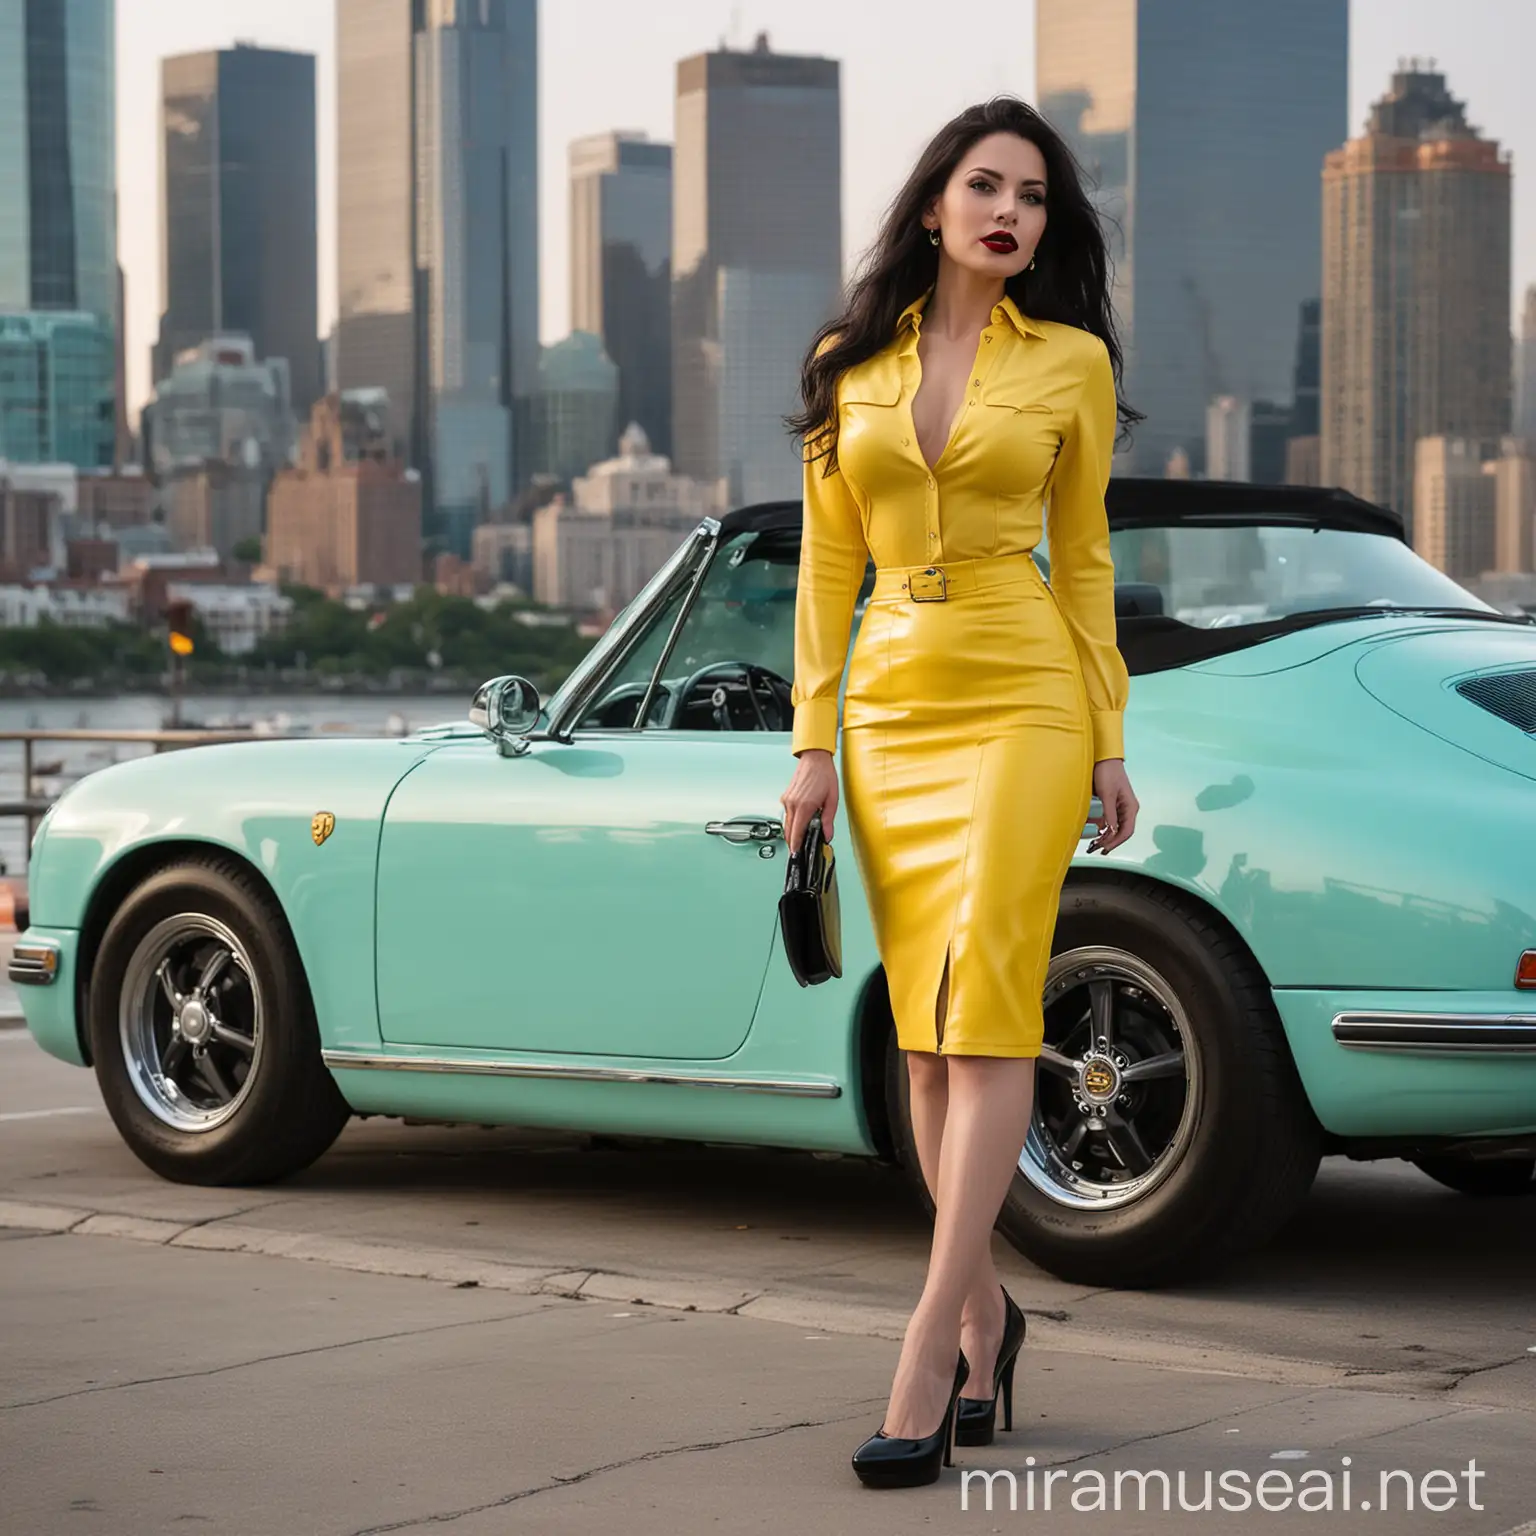 40 year old, long tight bodycon bright yellow color leather pencil skirt, aqua color button front blouse,  long black wavy hair,  black lipstick, aqua color 7 inch high heel , city skyline, pouty lips, standing next to, 1955 porsche speedster color black